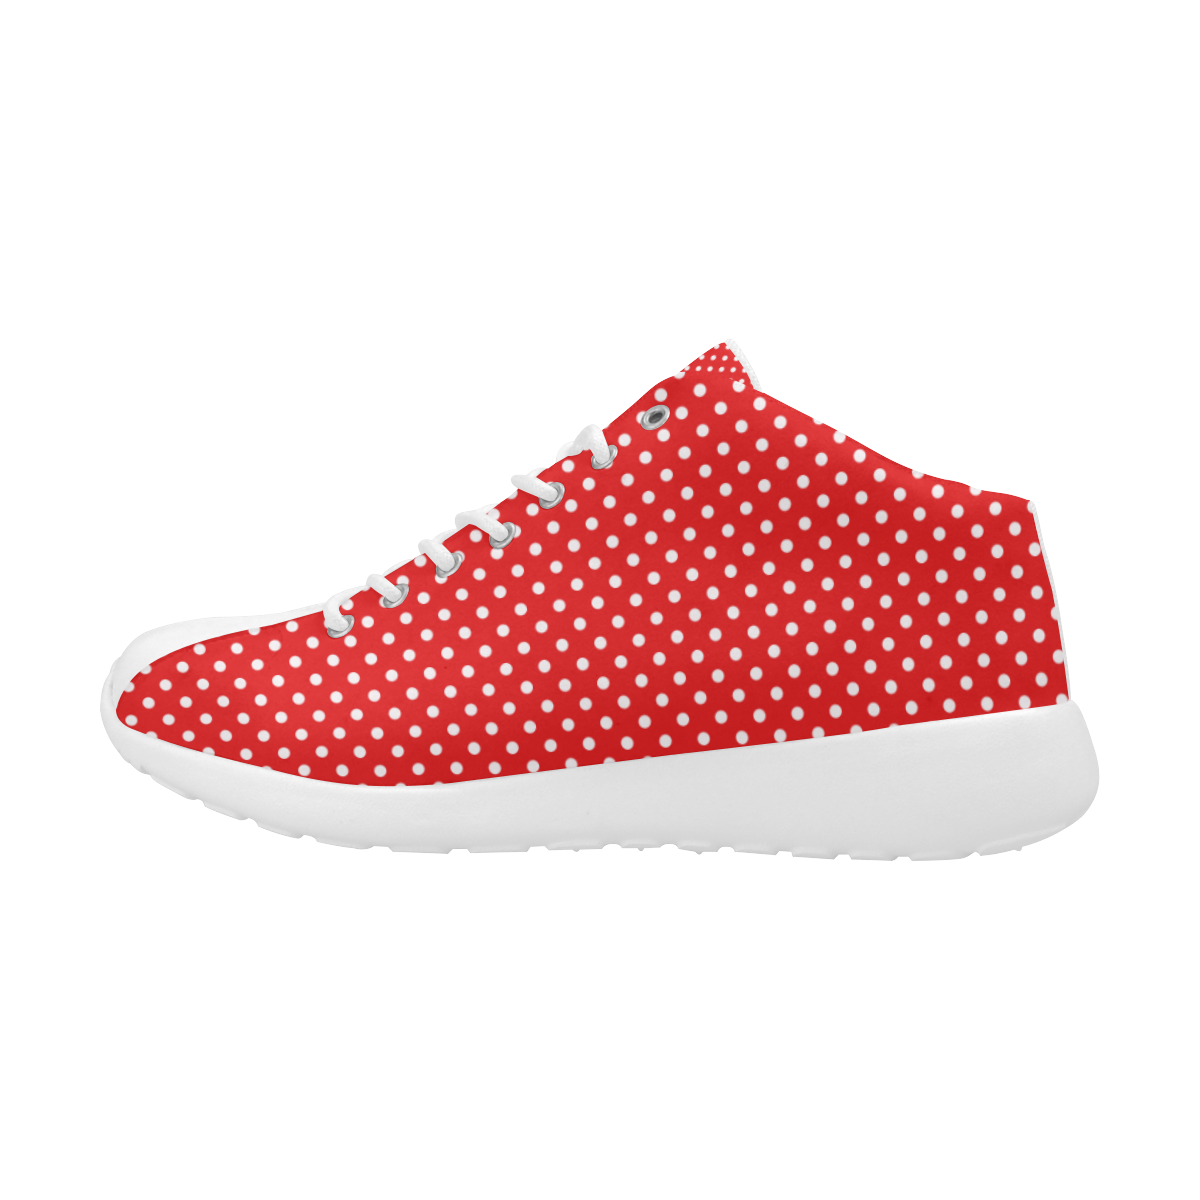 Red polka dots Women's Basketball Training Shoes/Large Size (Model 47502)